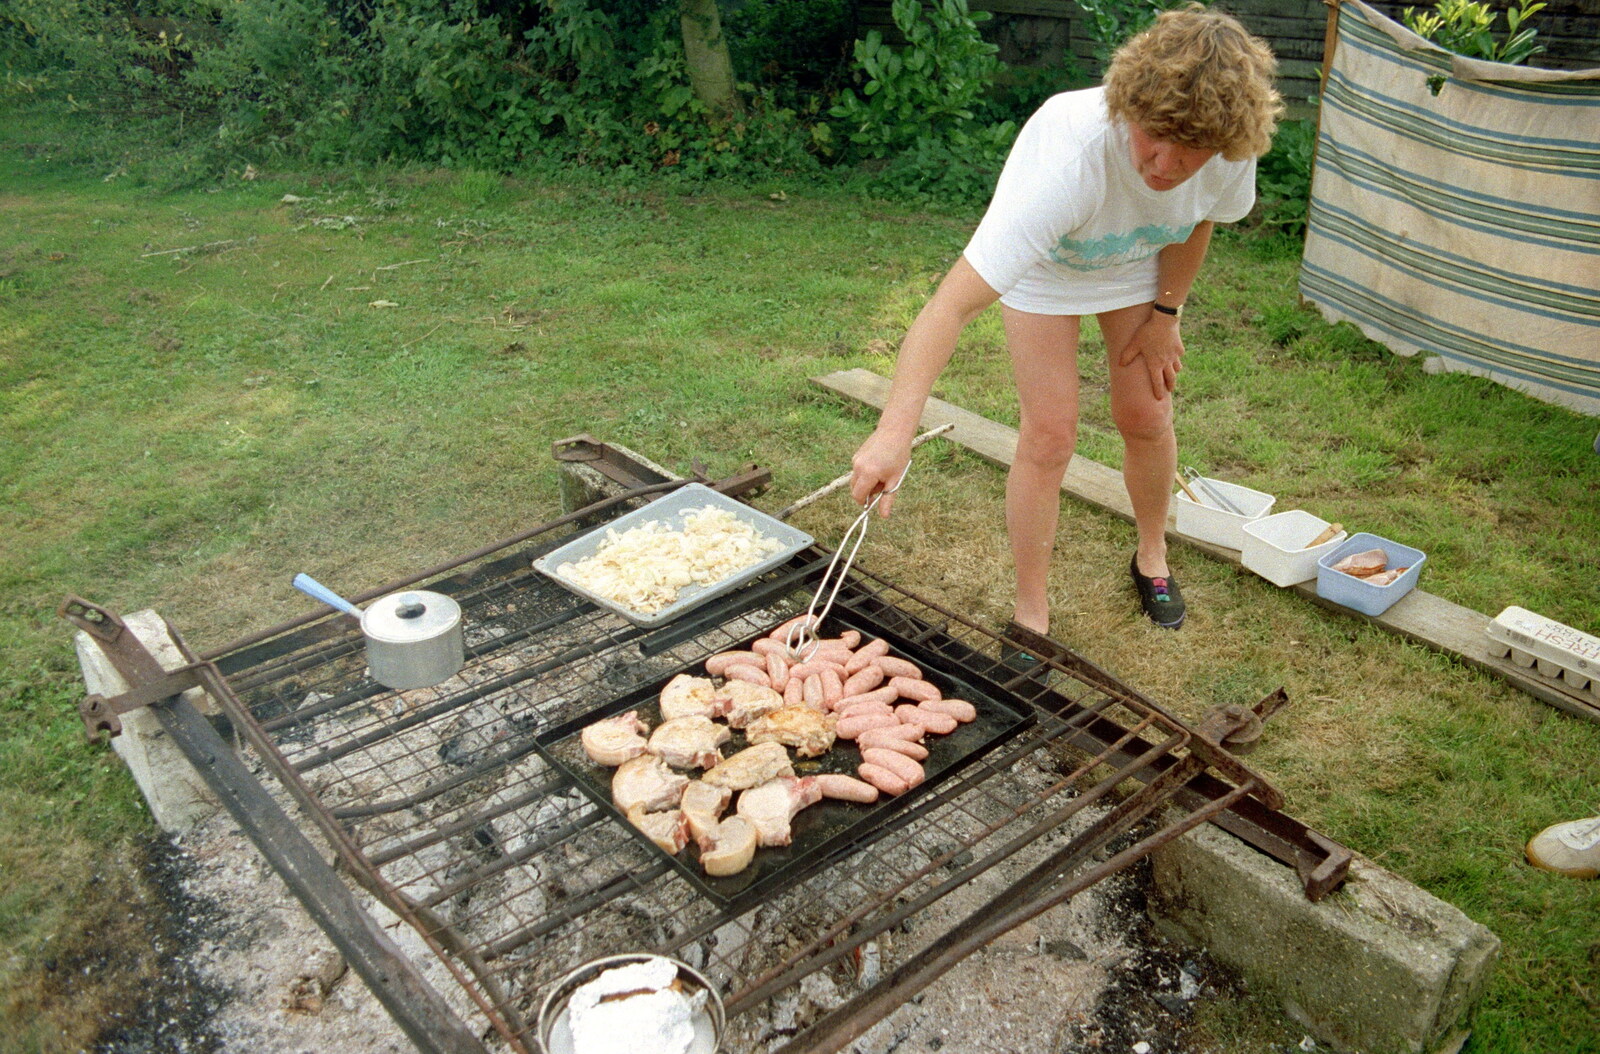 Brenda turns some sausages from A Geoff and Brenda Barbeque, Stuston, Suffolk - 3rd April 1994